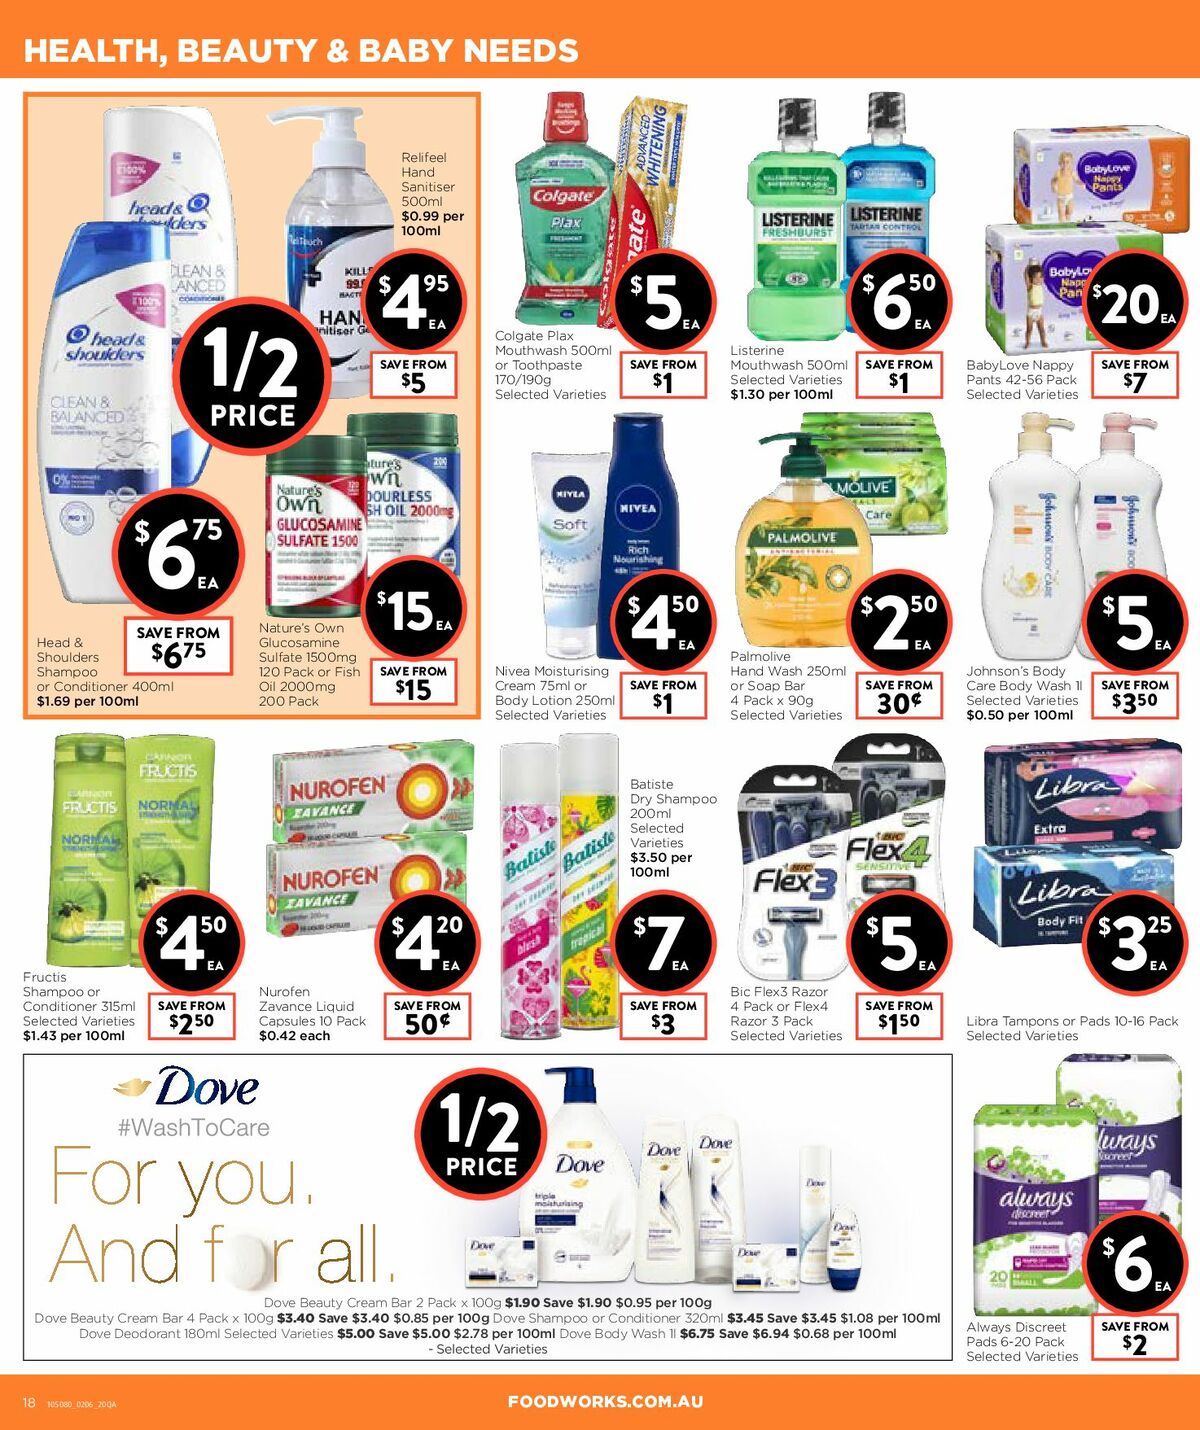 FoodWorks Supermarket Catalogues from 2 June